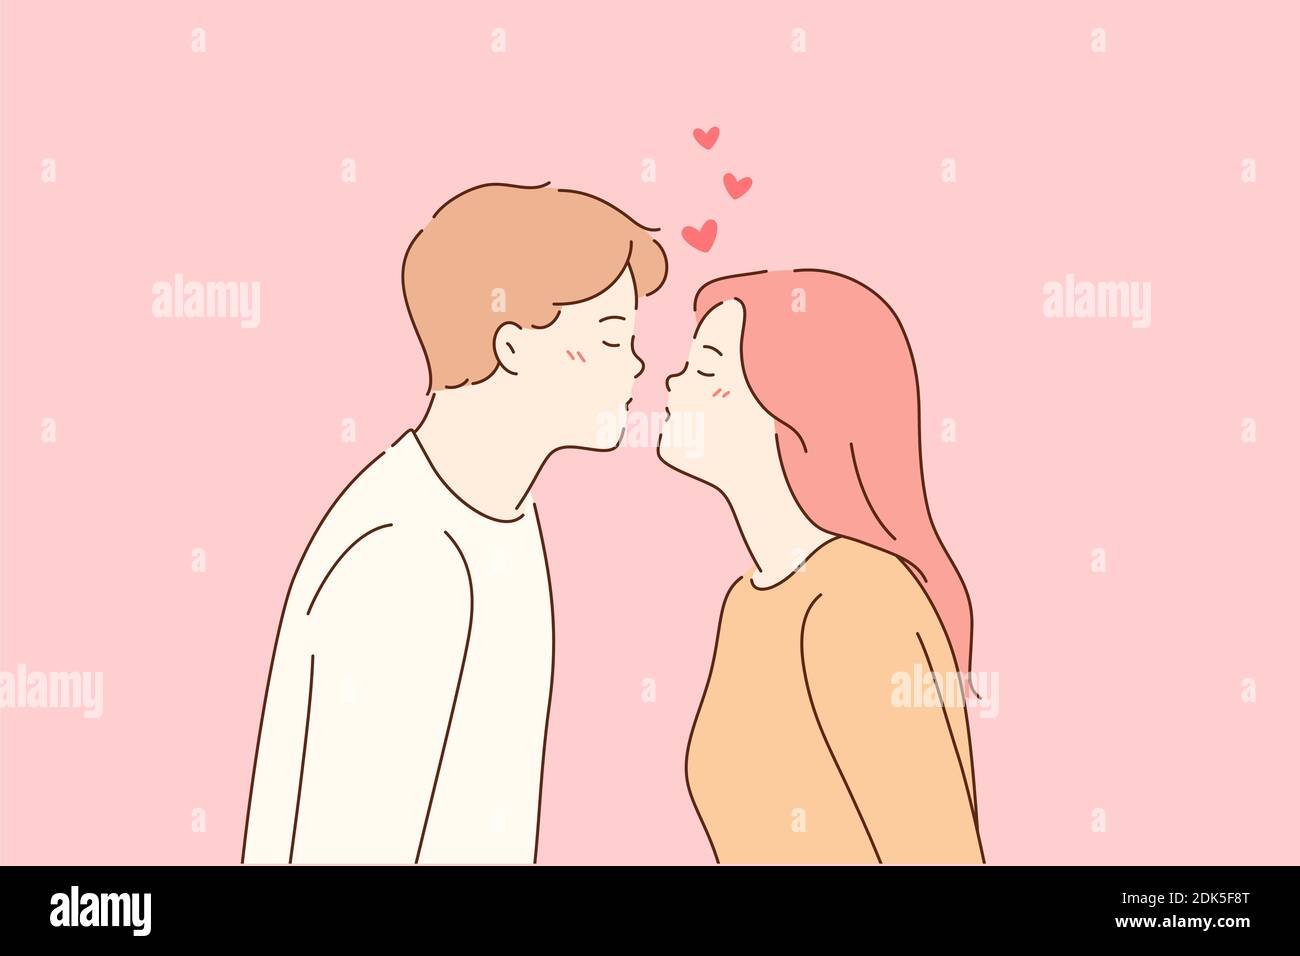 Kiss, love, romantic dating concept. Profile portrait of young ...